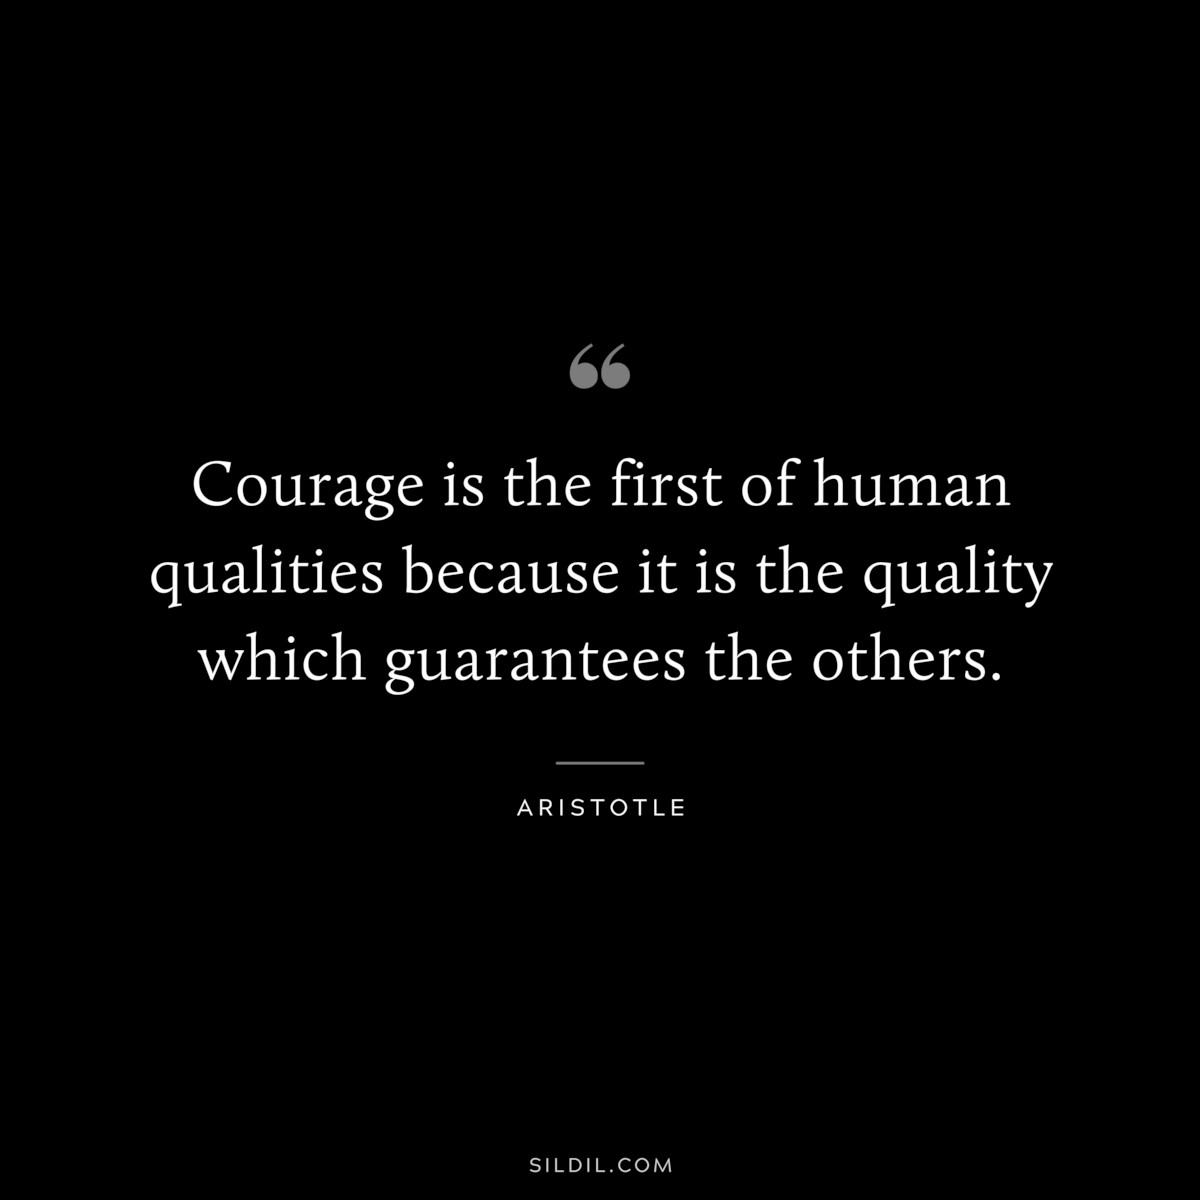 Courage is the first of human qualities because it is the quality which guarantees the others. ― Aristotle